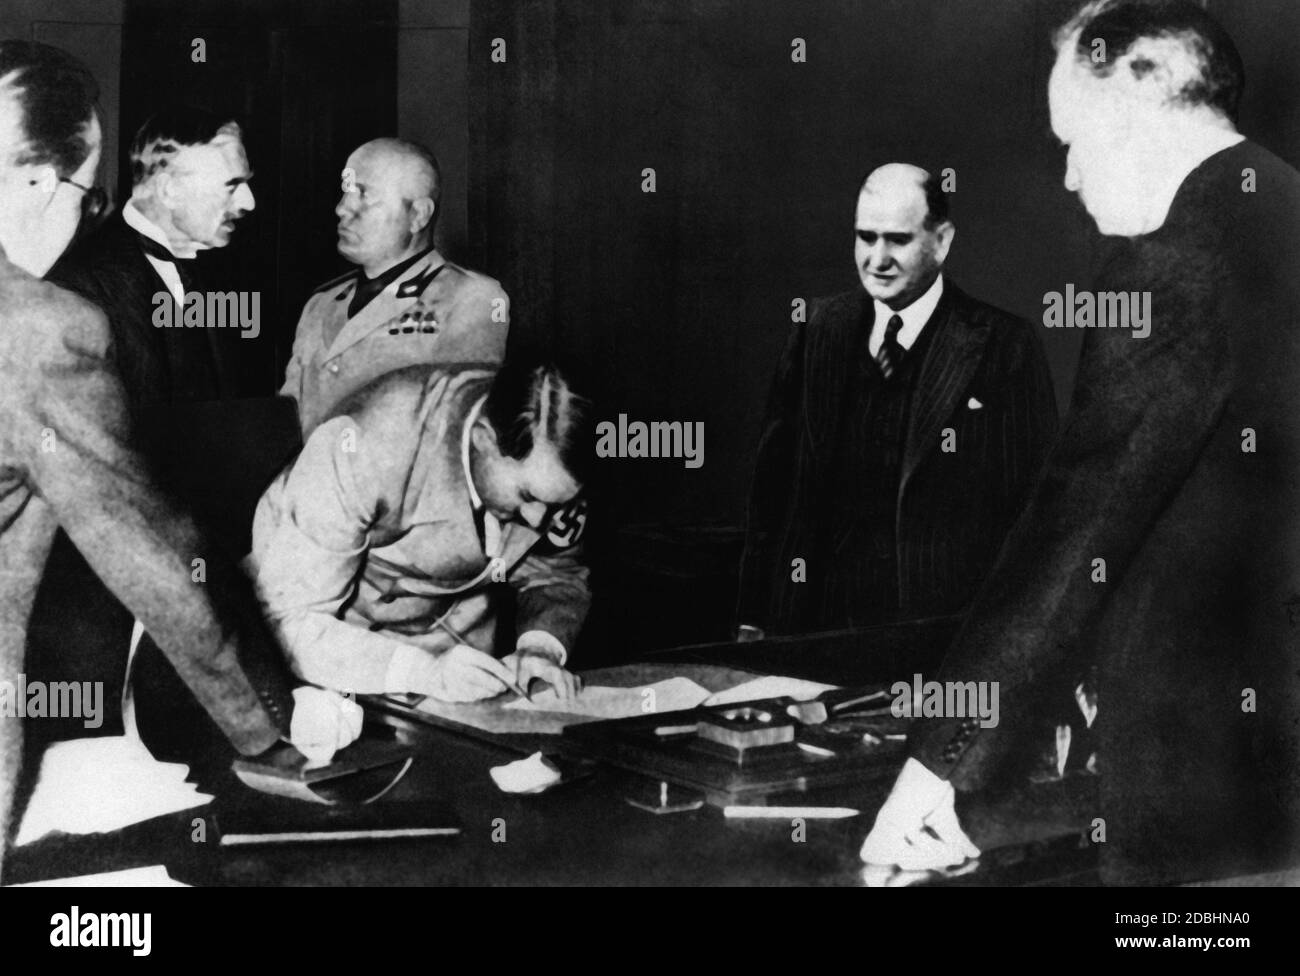 Adolf Hitler signing the Munich Agreement. In the background Chamberlain and Benito Mussolini. On the right, Daladier and Ribbentrop. Stock Photo